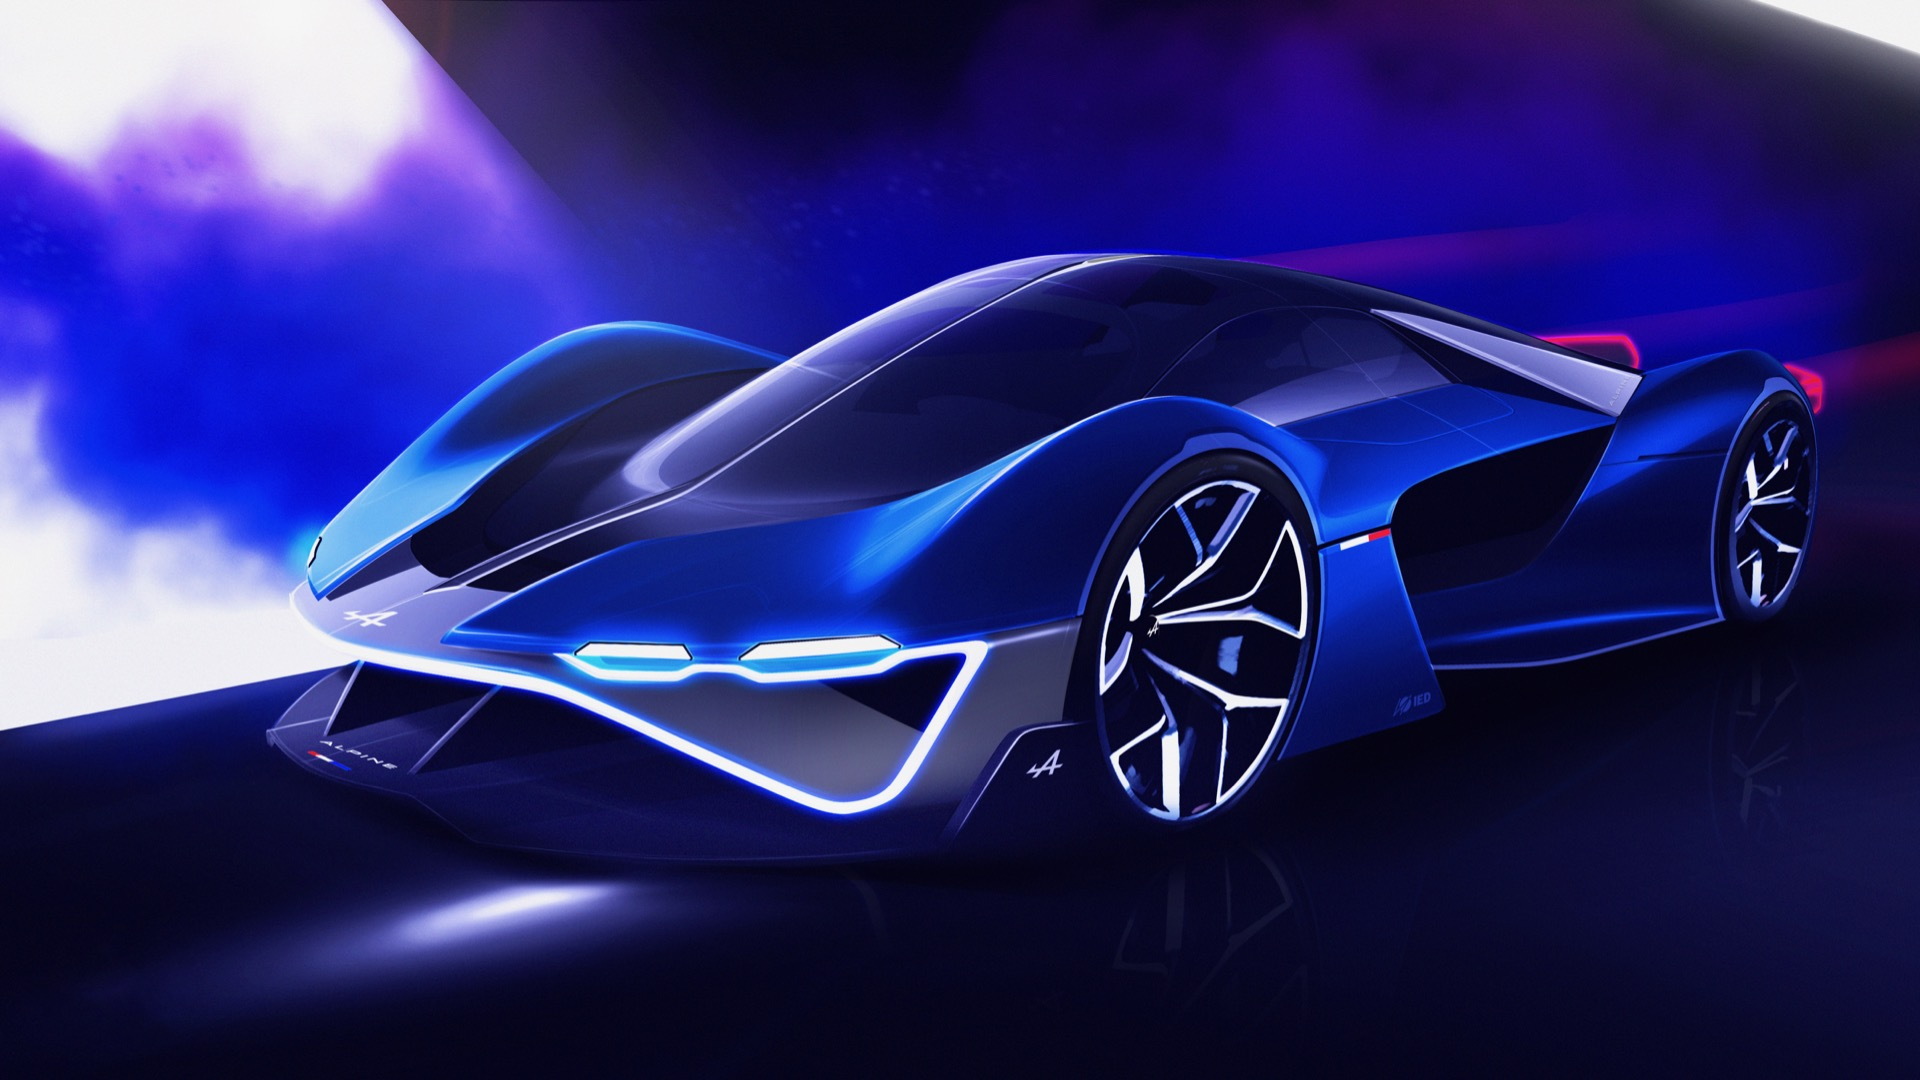 Alpine A4810 hypercar study by IED students